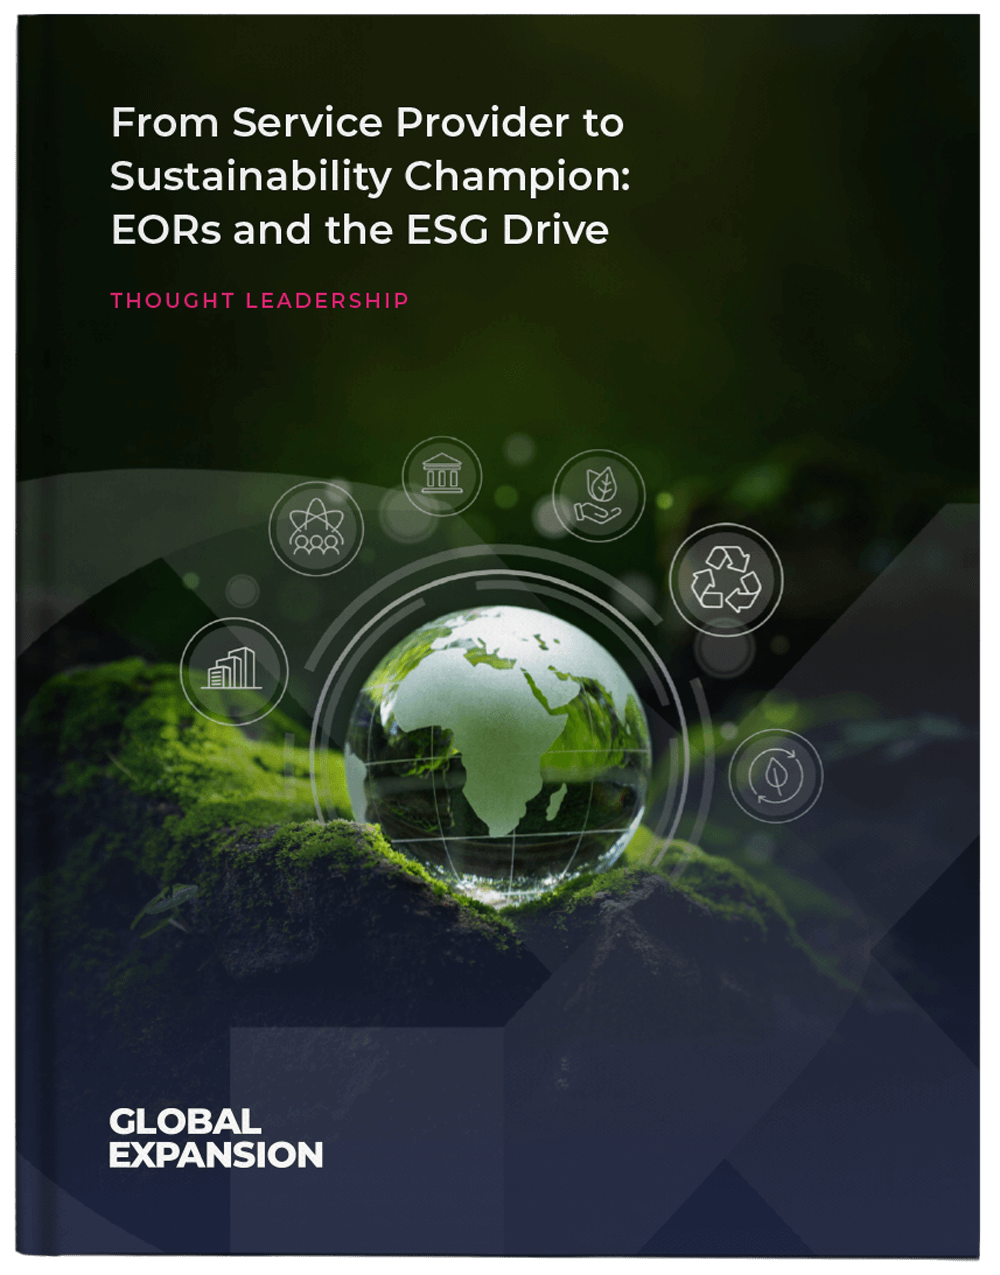 From-Service-Provider-to-Sustainability-Champion-Cover